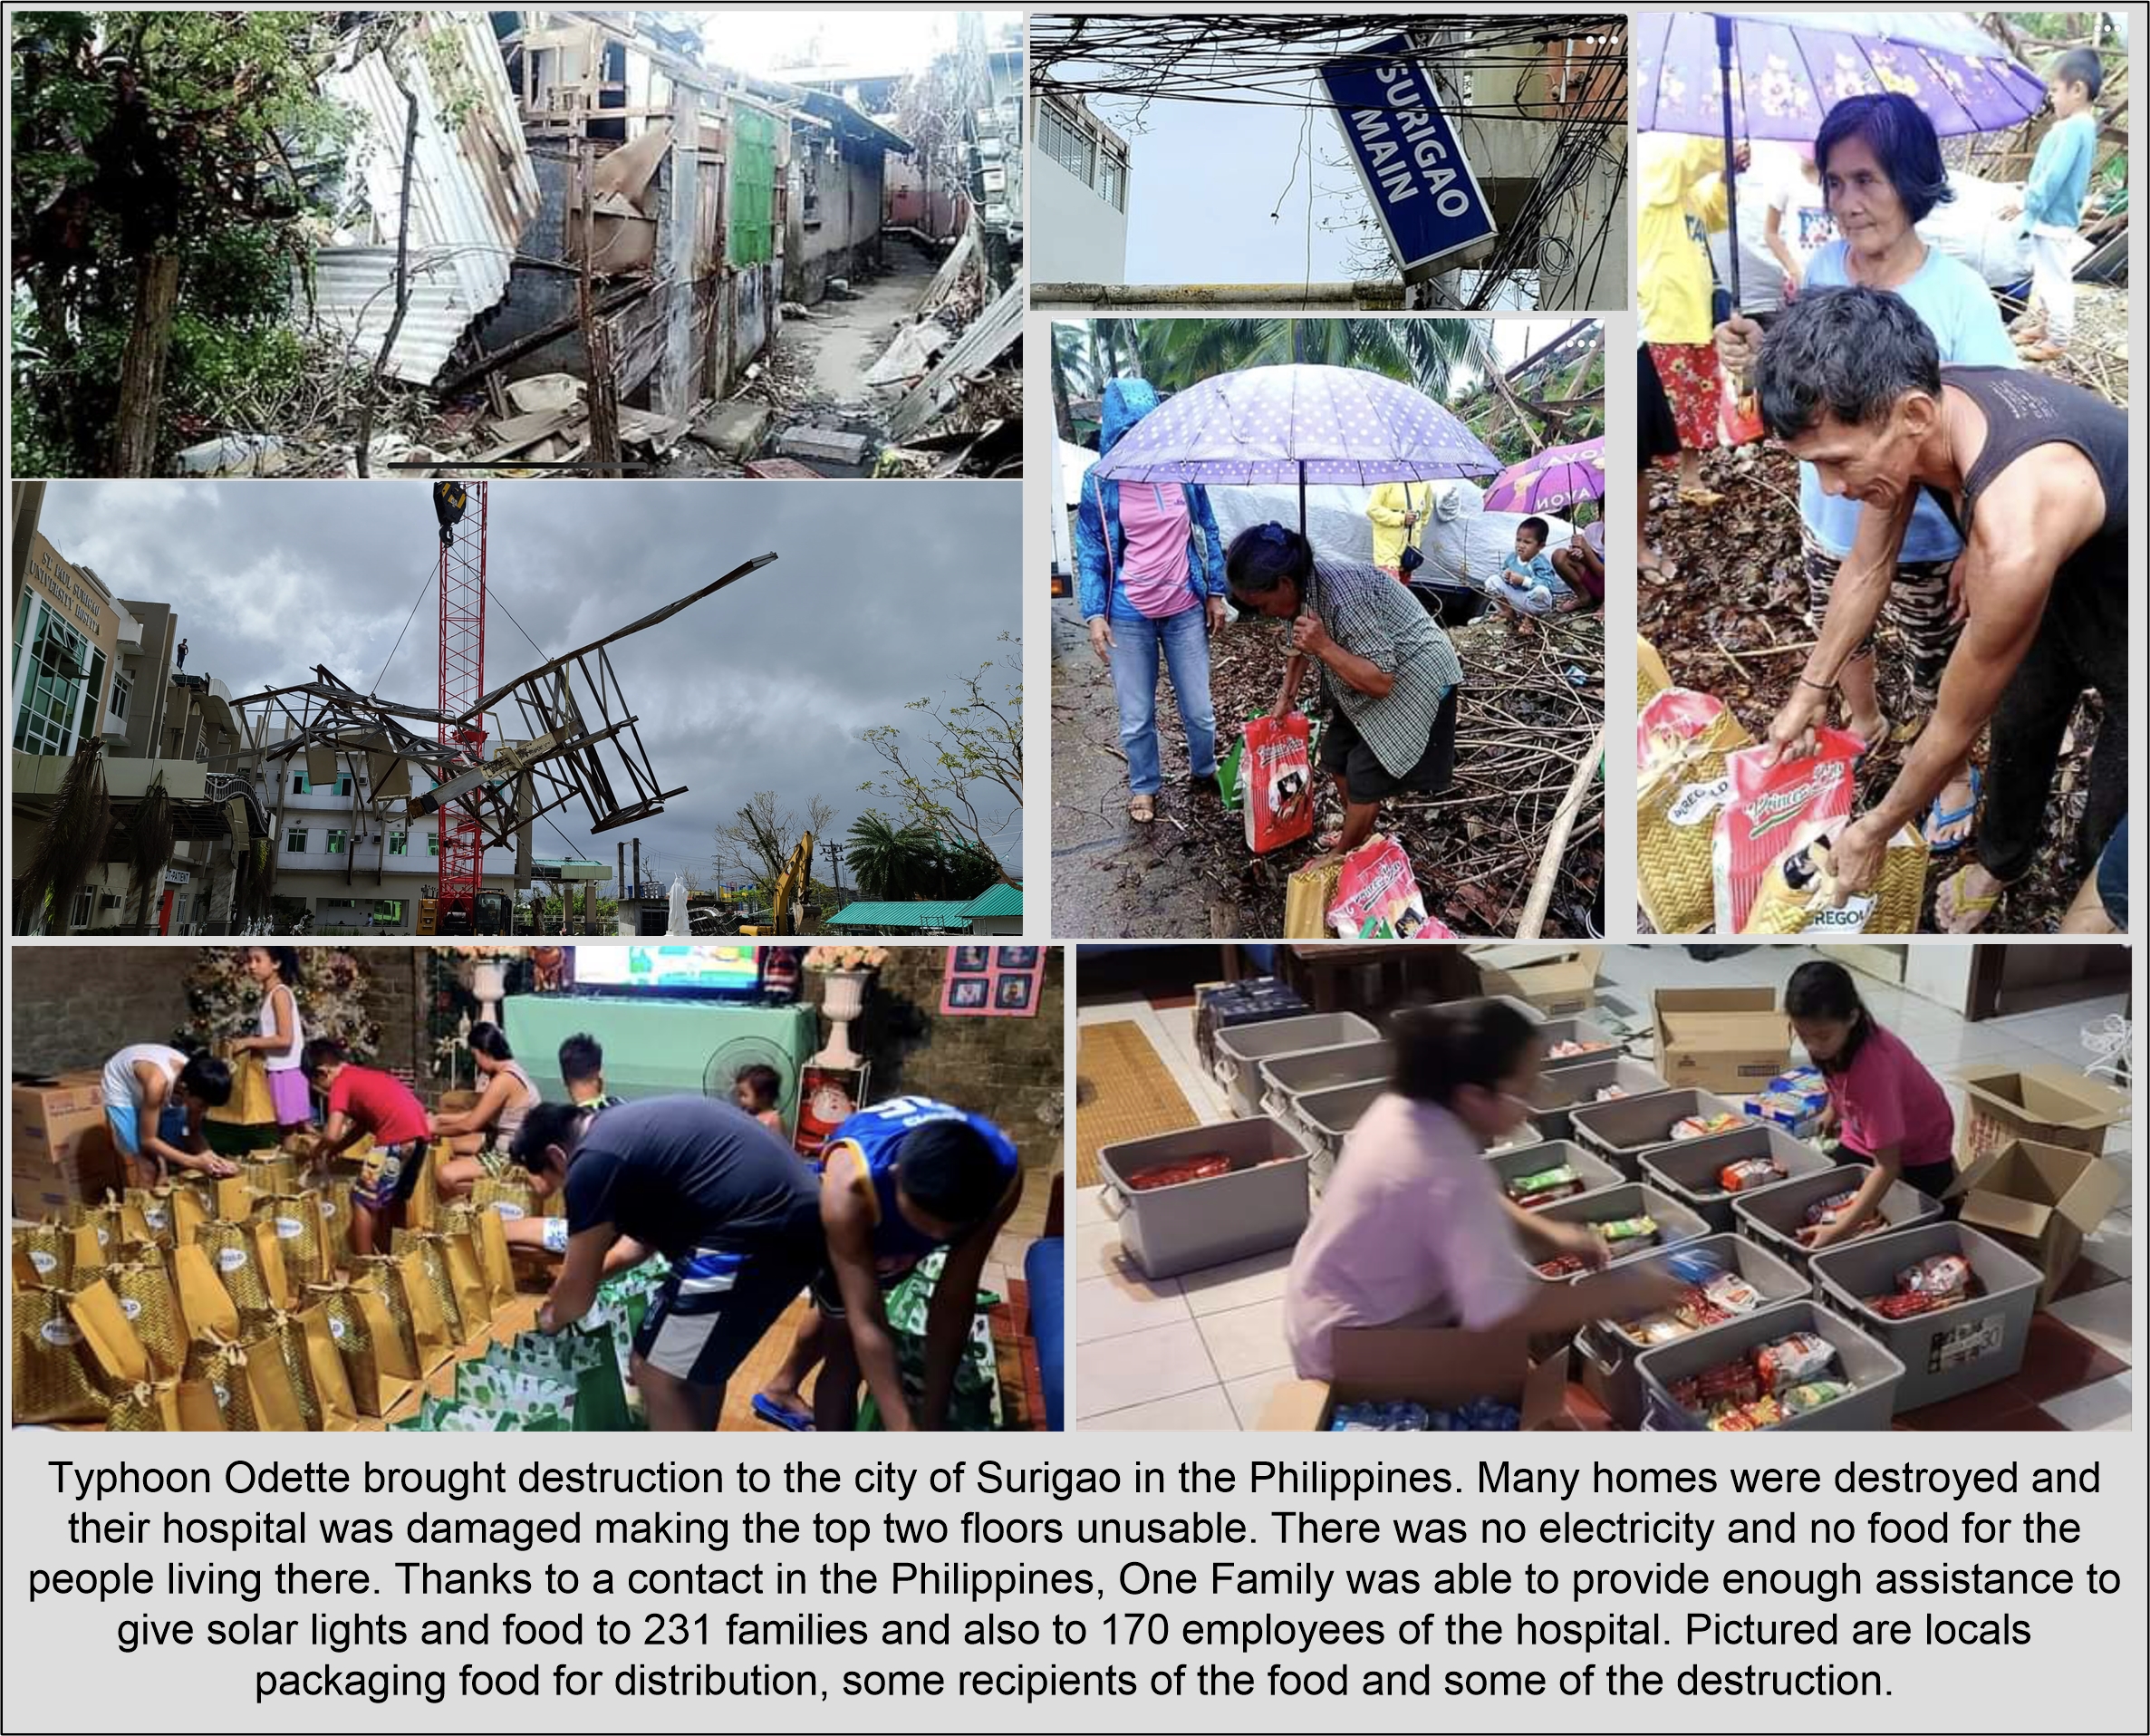 Assistance sent to help people suffering from the super typhoon Odell